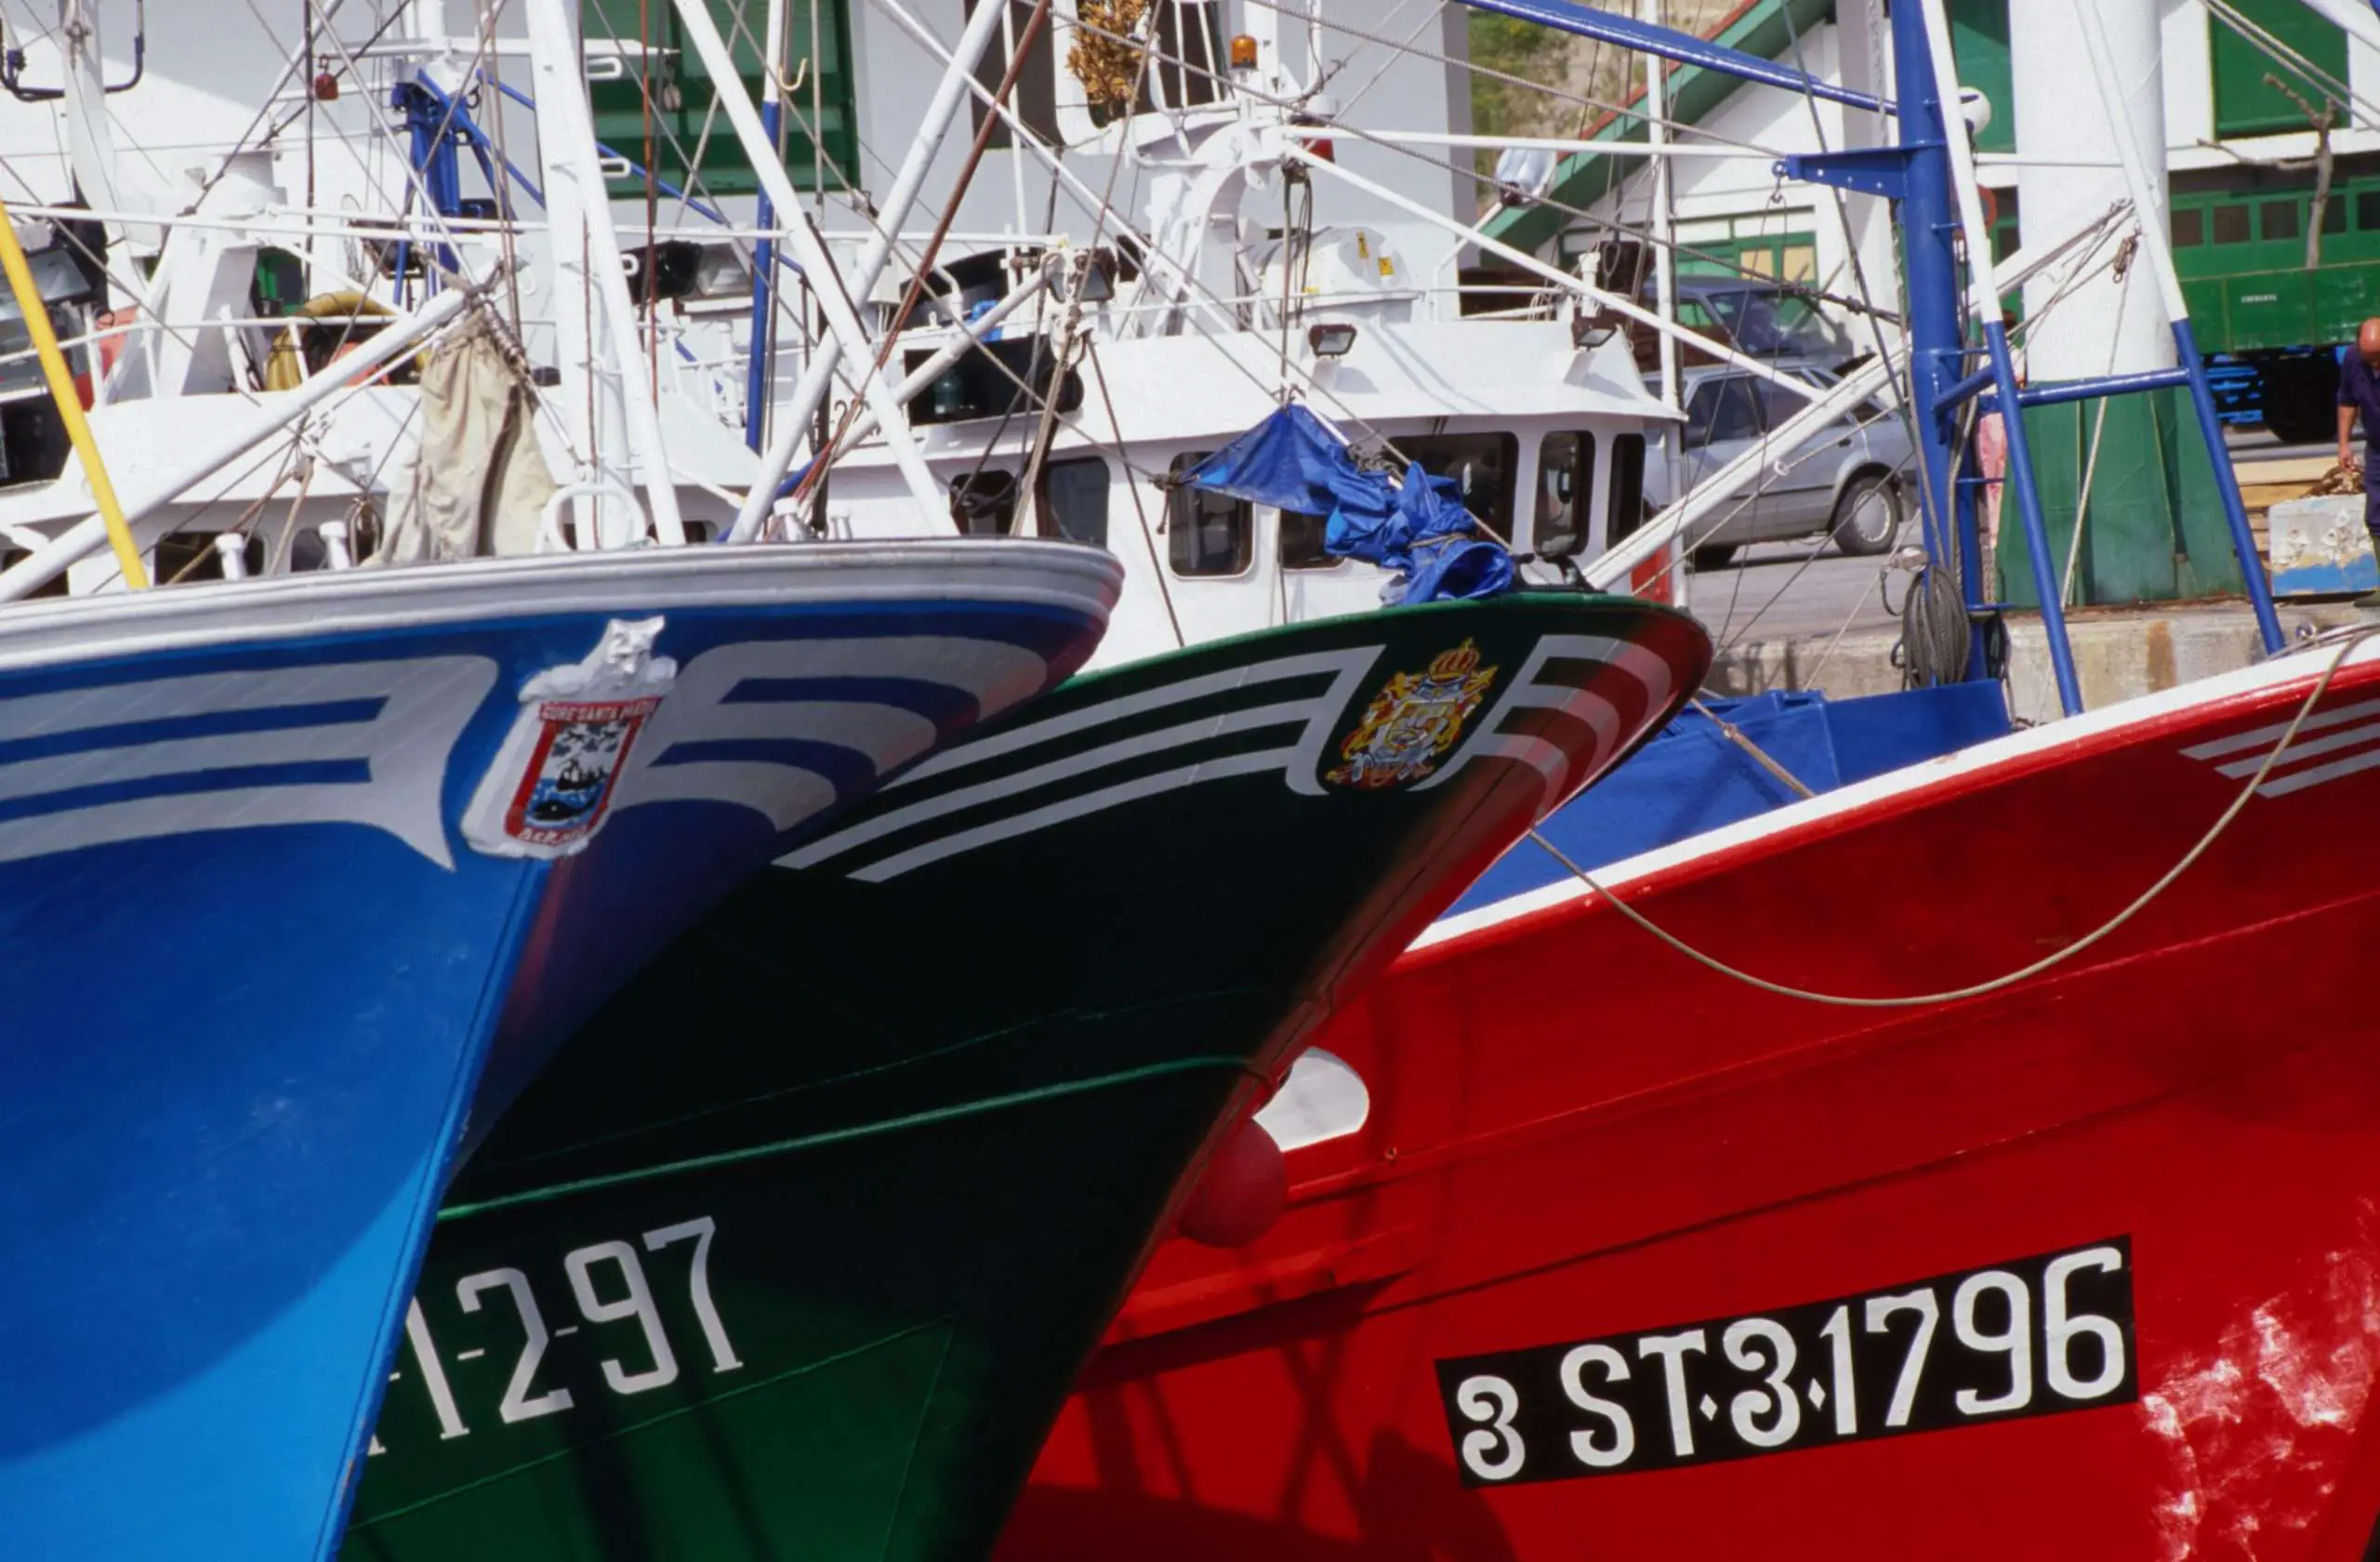 Where to Place Your Boat Registration Numbers